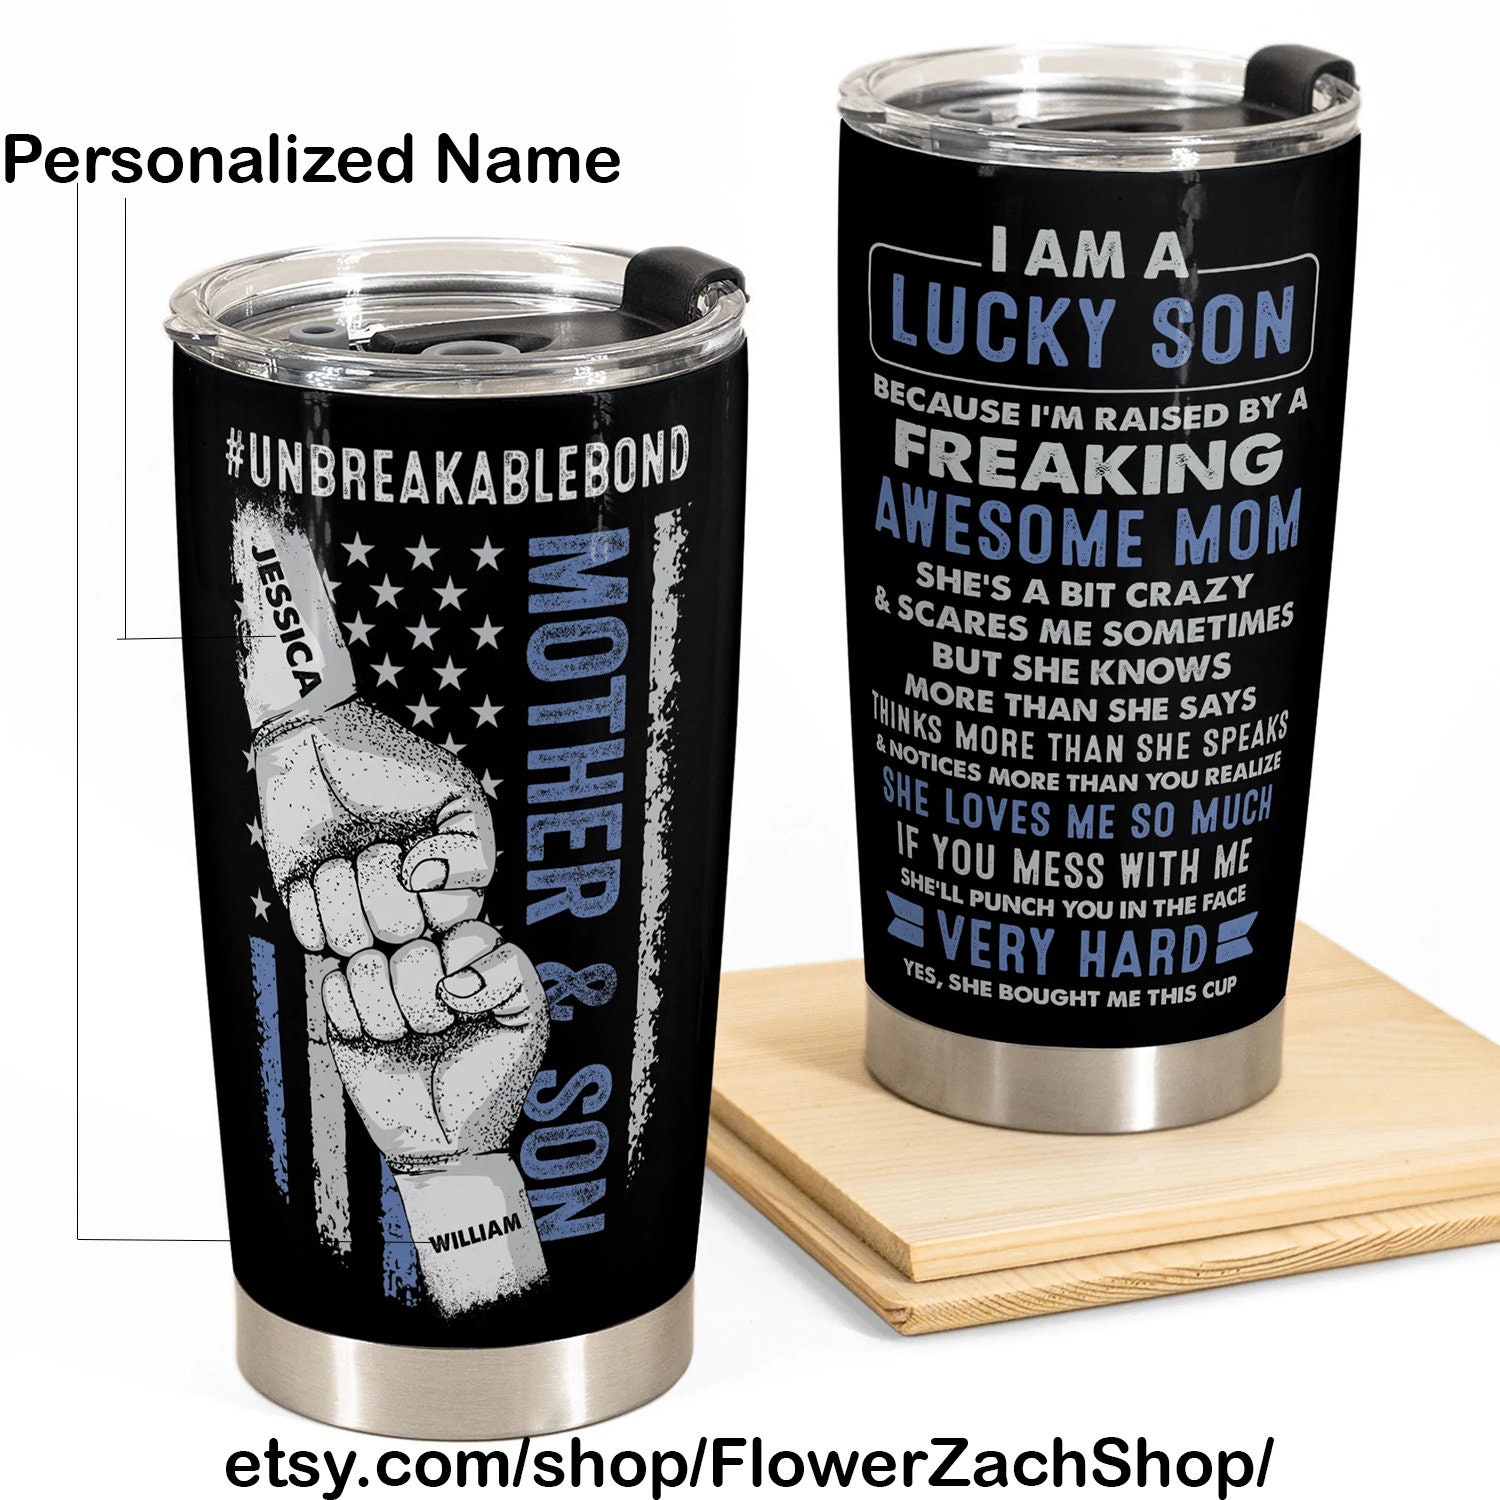 I'm Happy Go Lucky - Personalized Tumbler Cup - Birthday Gift For